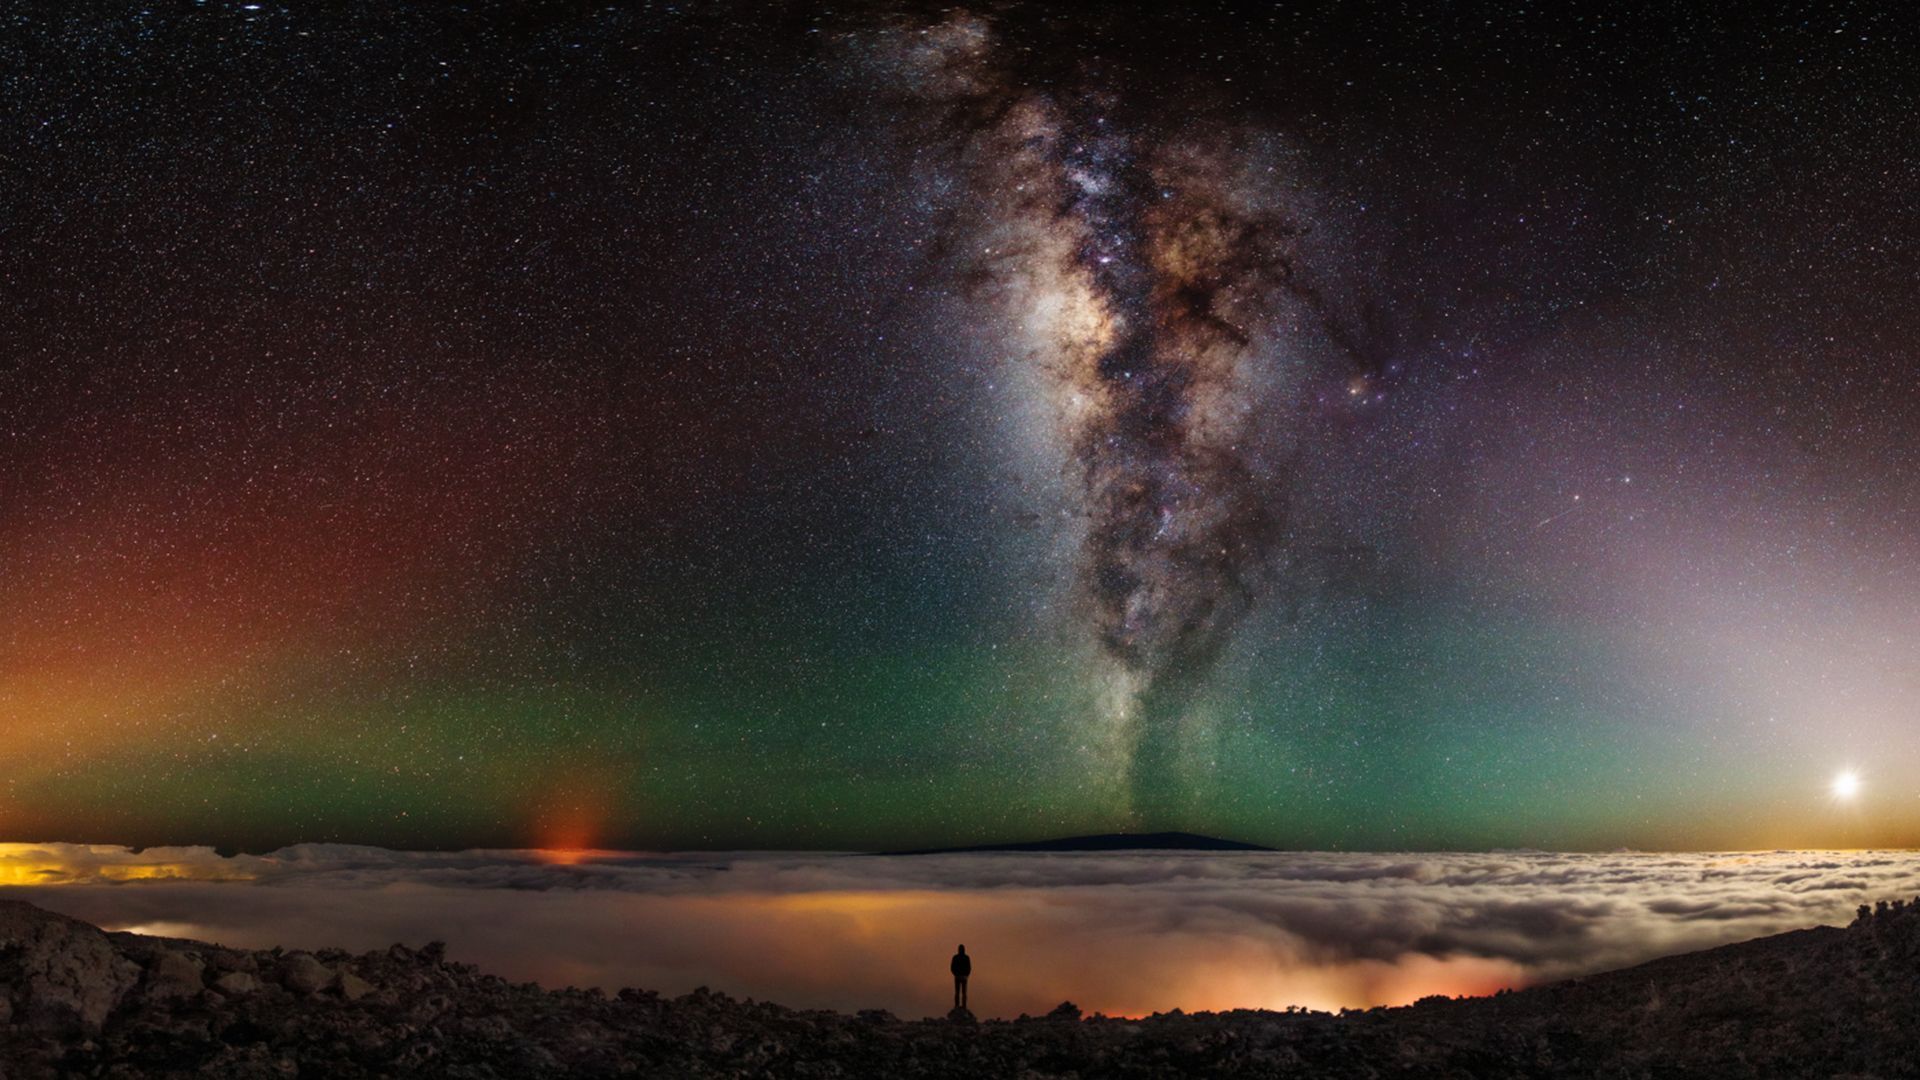 Man standing at edge of volcano with milky way, planets in ...